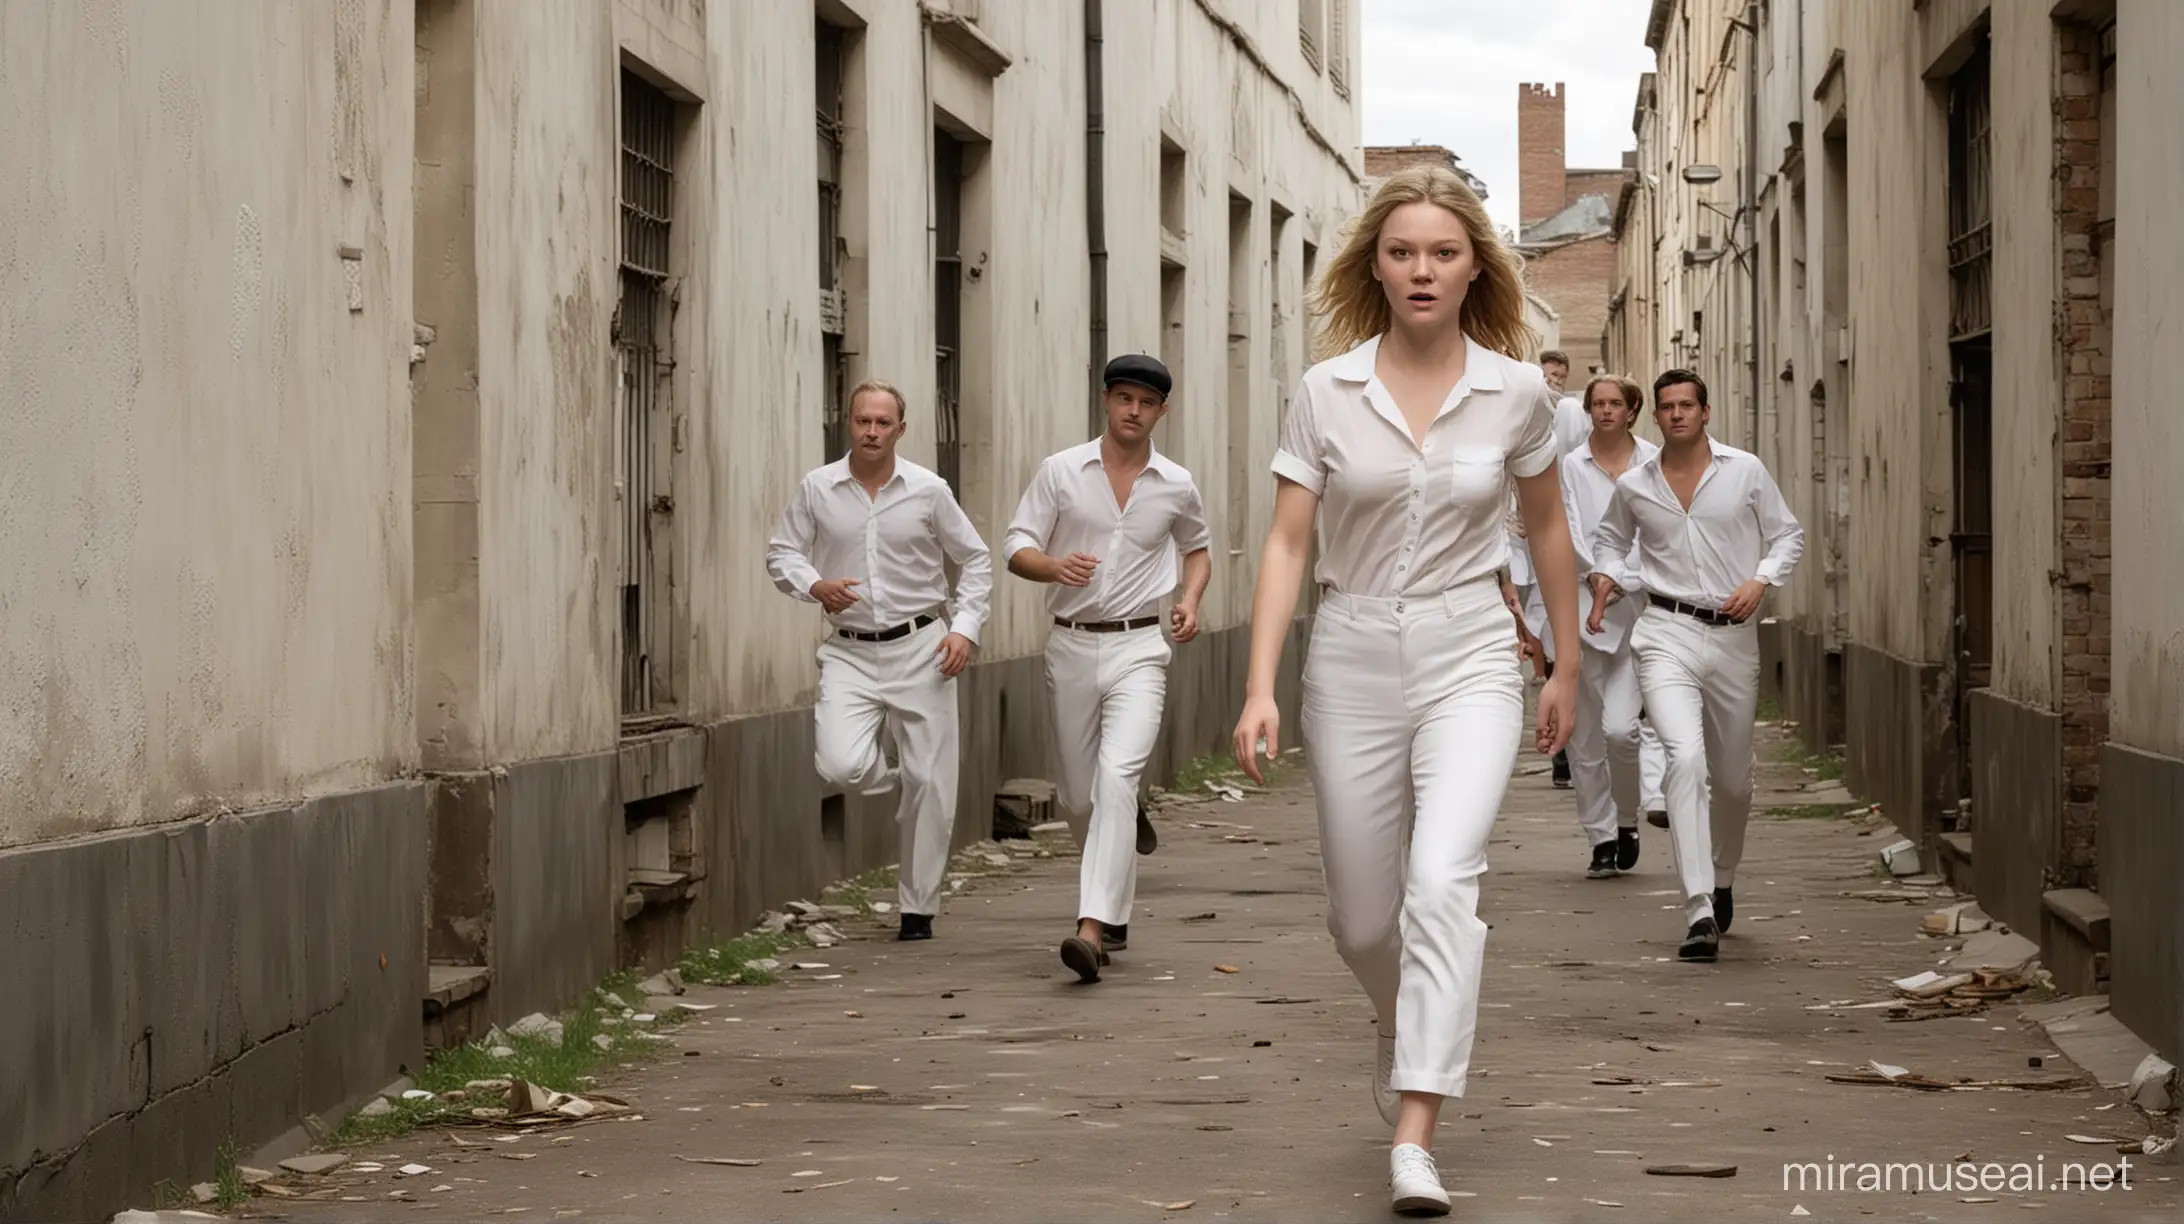 Generate an image of a completely naked lady that looks like the young Julia Stiles, running away from the gang of 4 guys dressed in white shirts, white trousers, white braces and a white cricket codpiece and bowler hat set in a rundown brutalist building